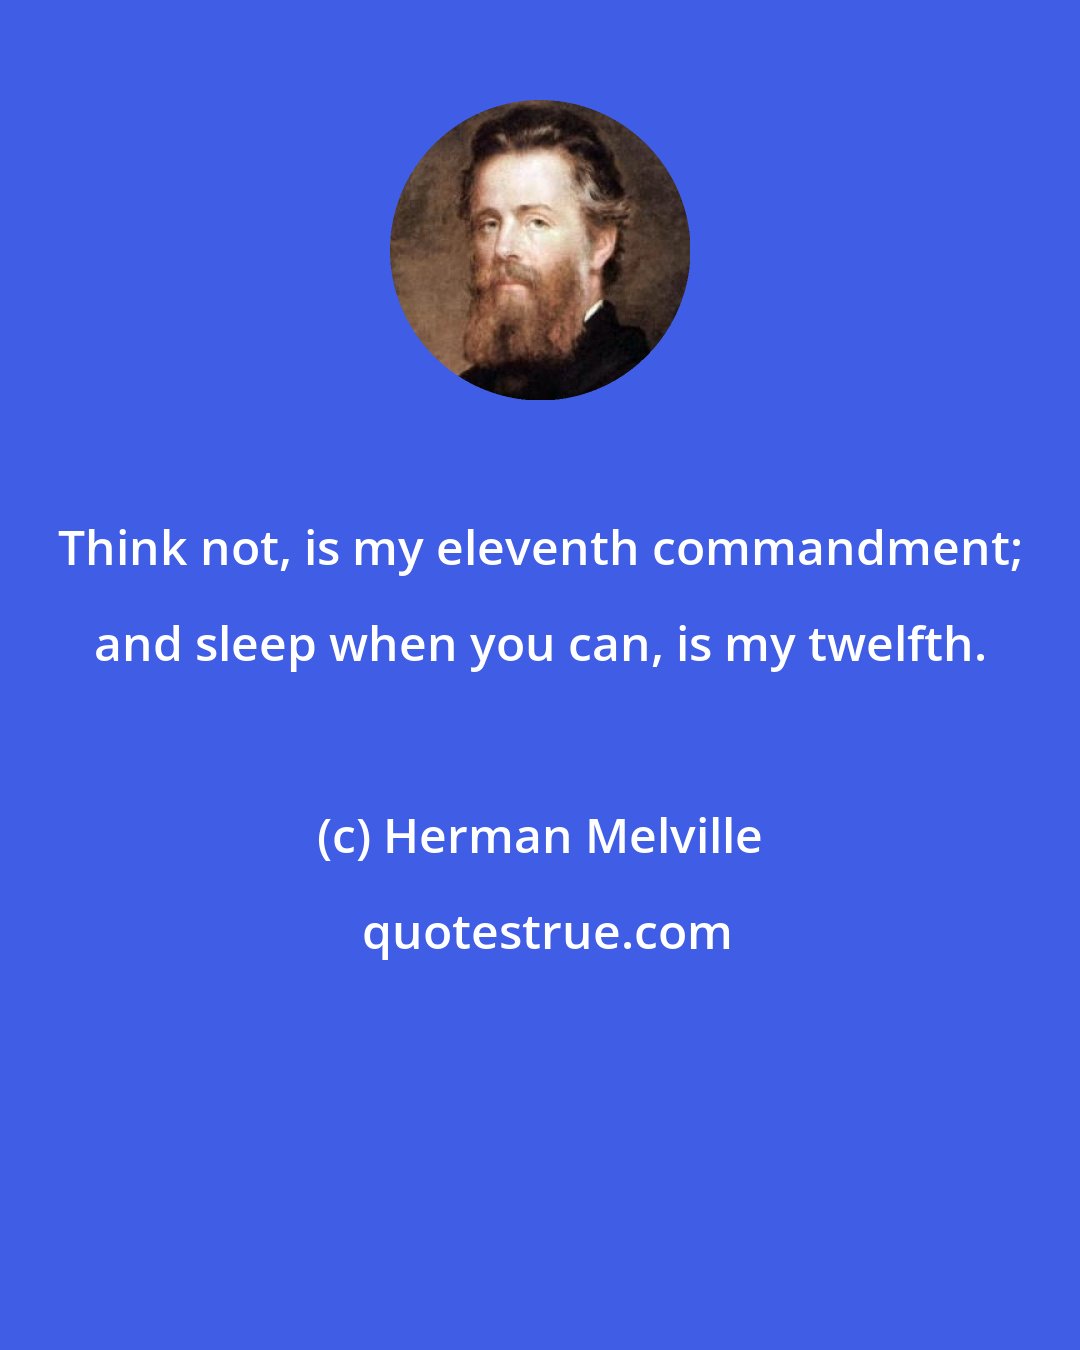 Herman Melville: Think not, is my eleventh commandment; and sleep when you can, is my twelfth.